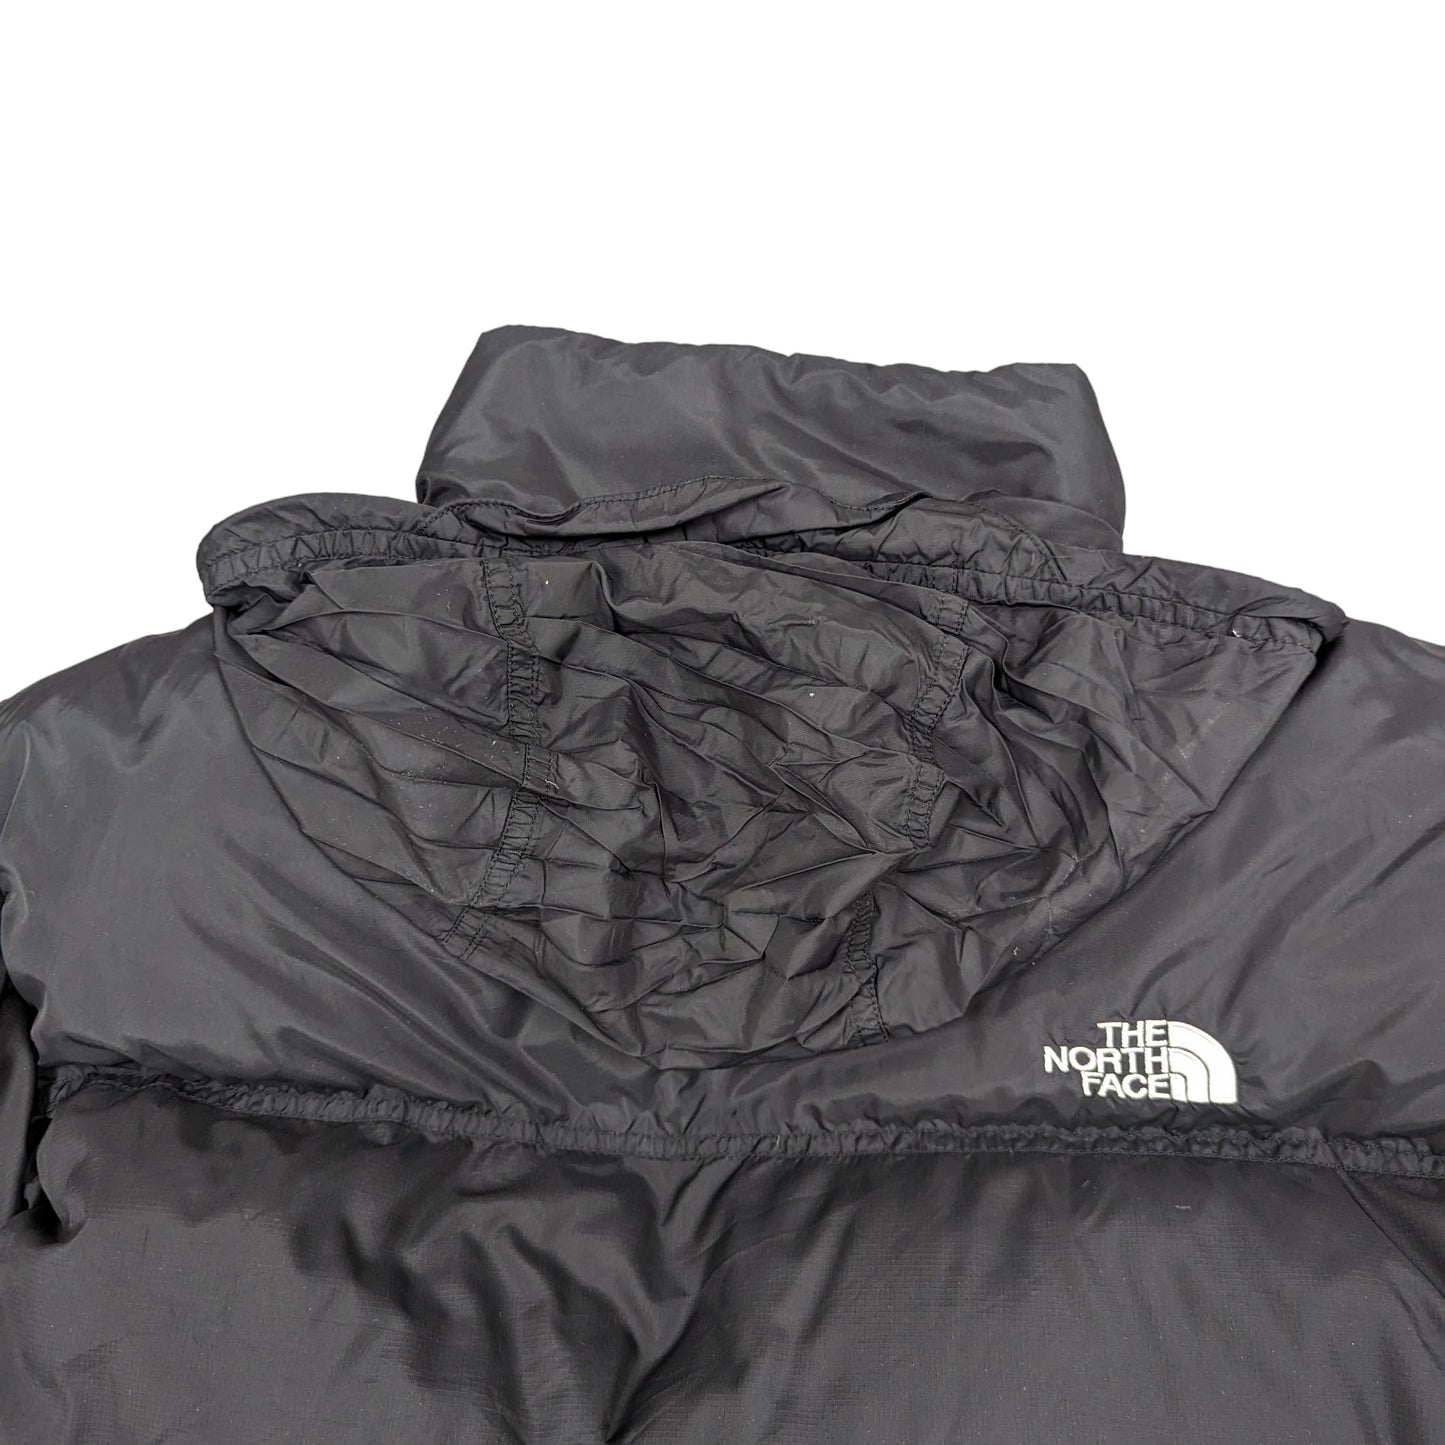 The North Face Nuptse Puffer Size M